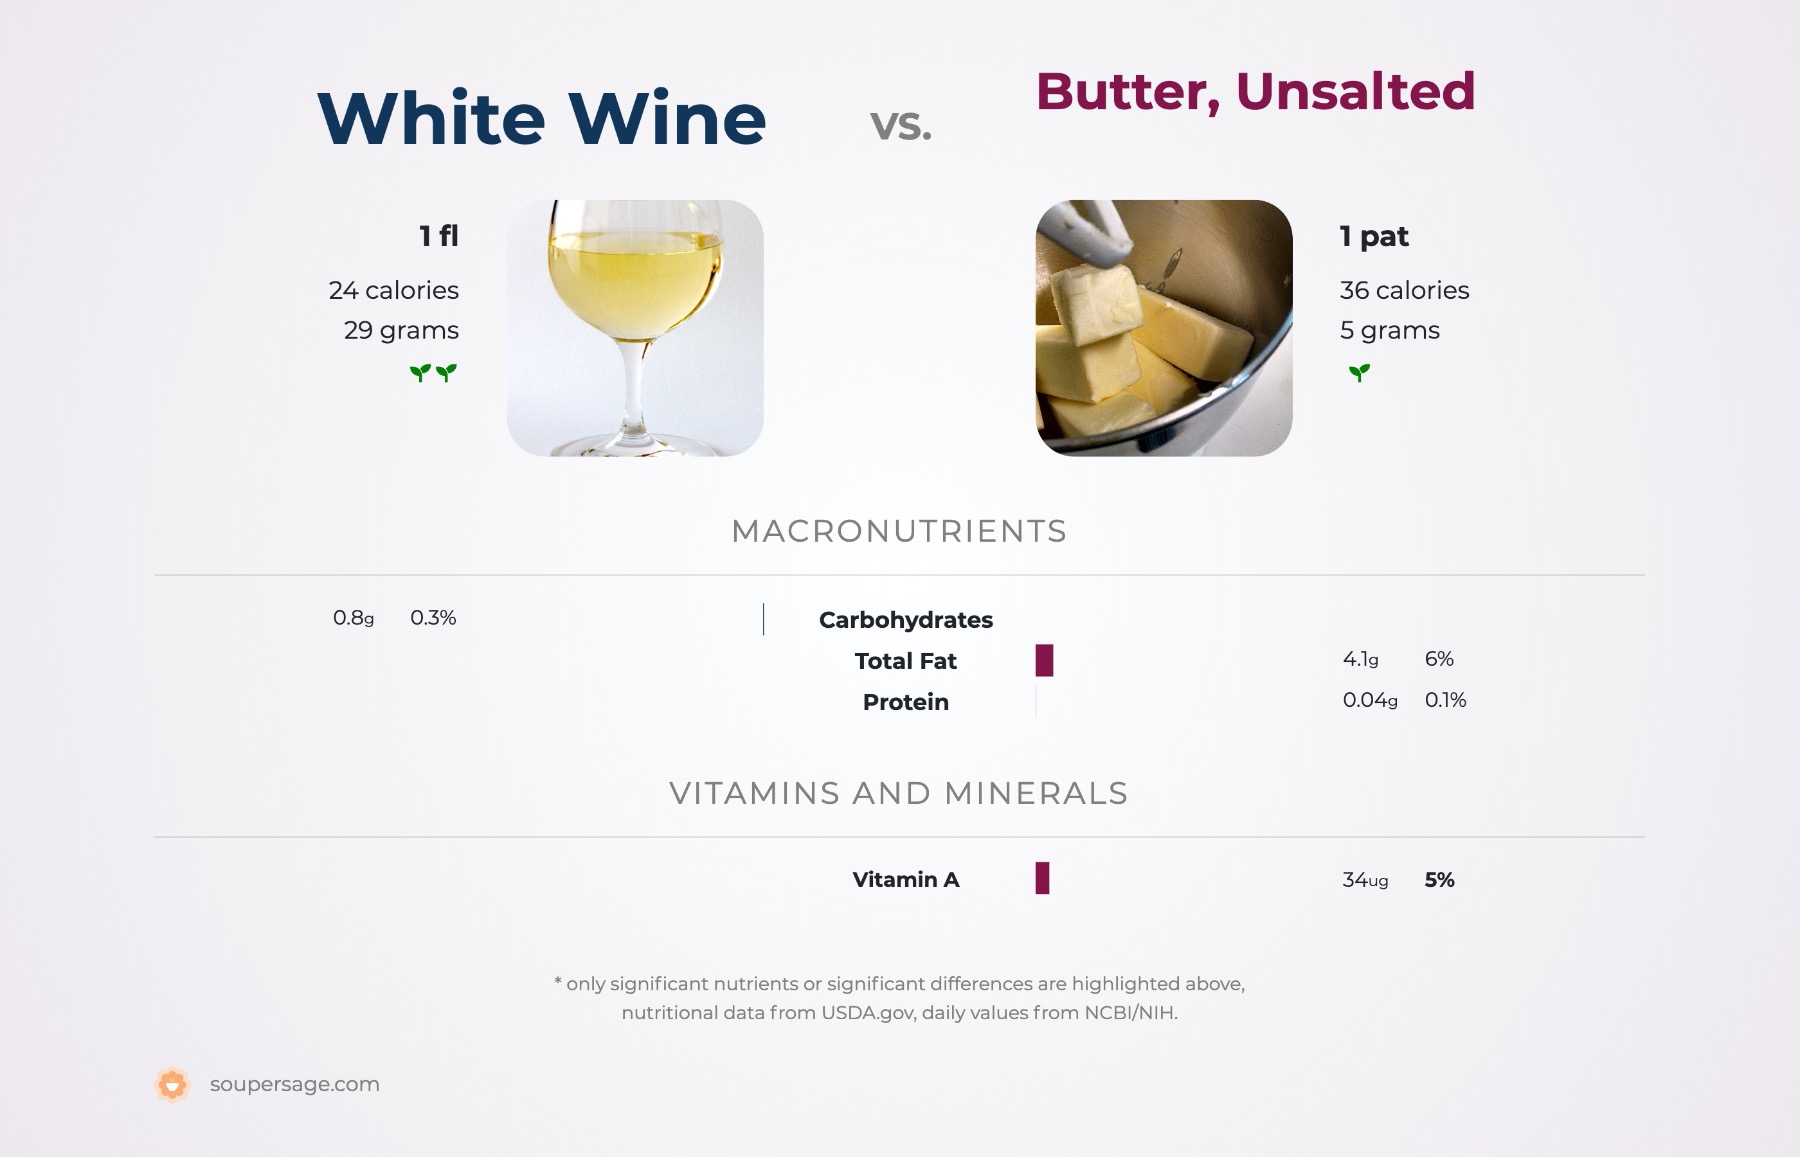 nutrition comparison of white wine vs. butter, unsalted